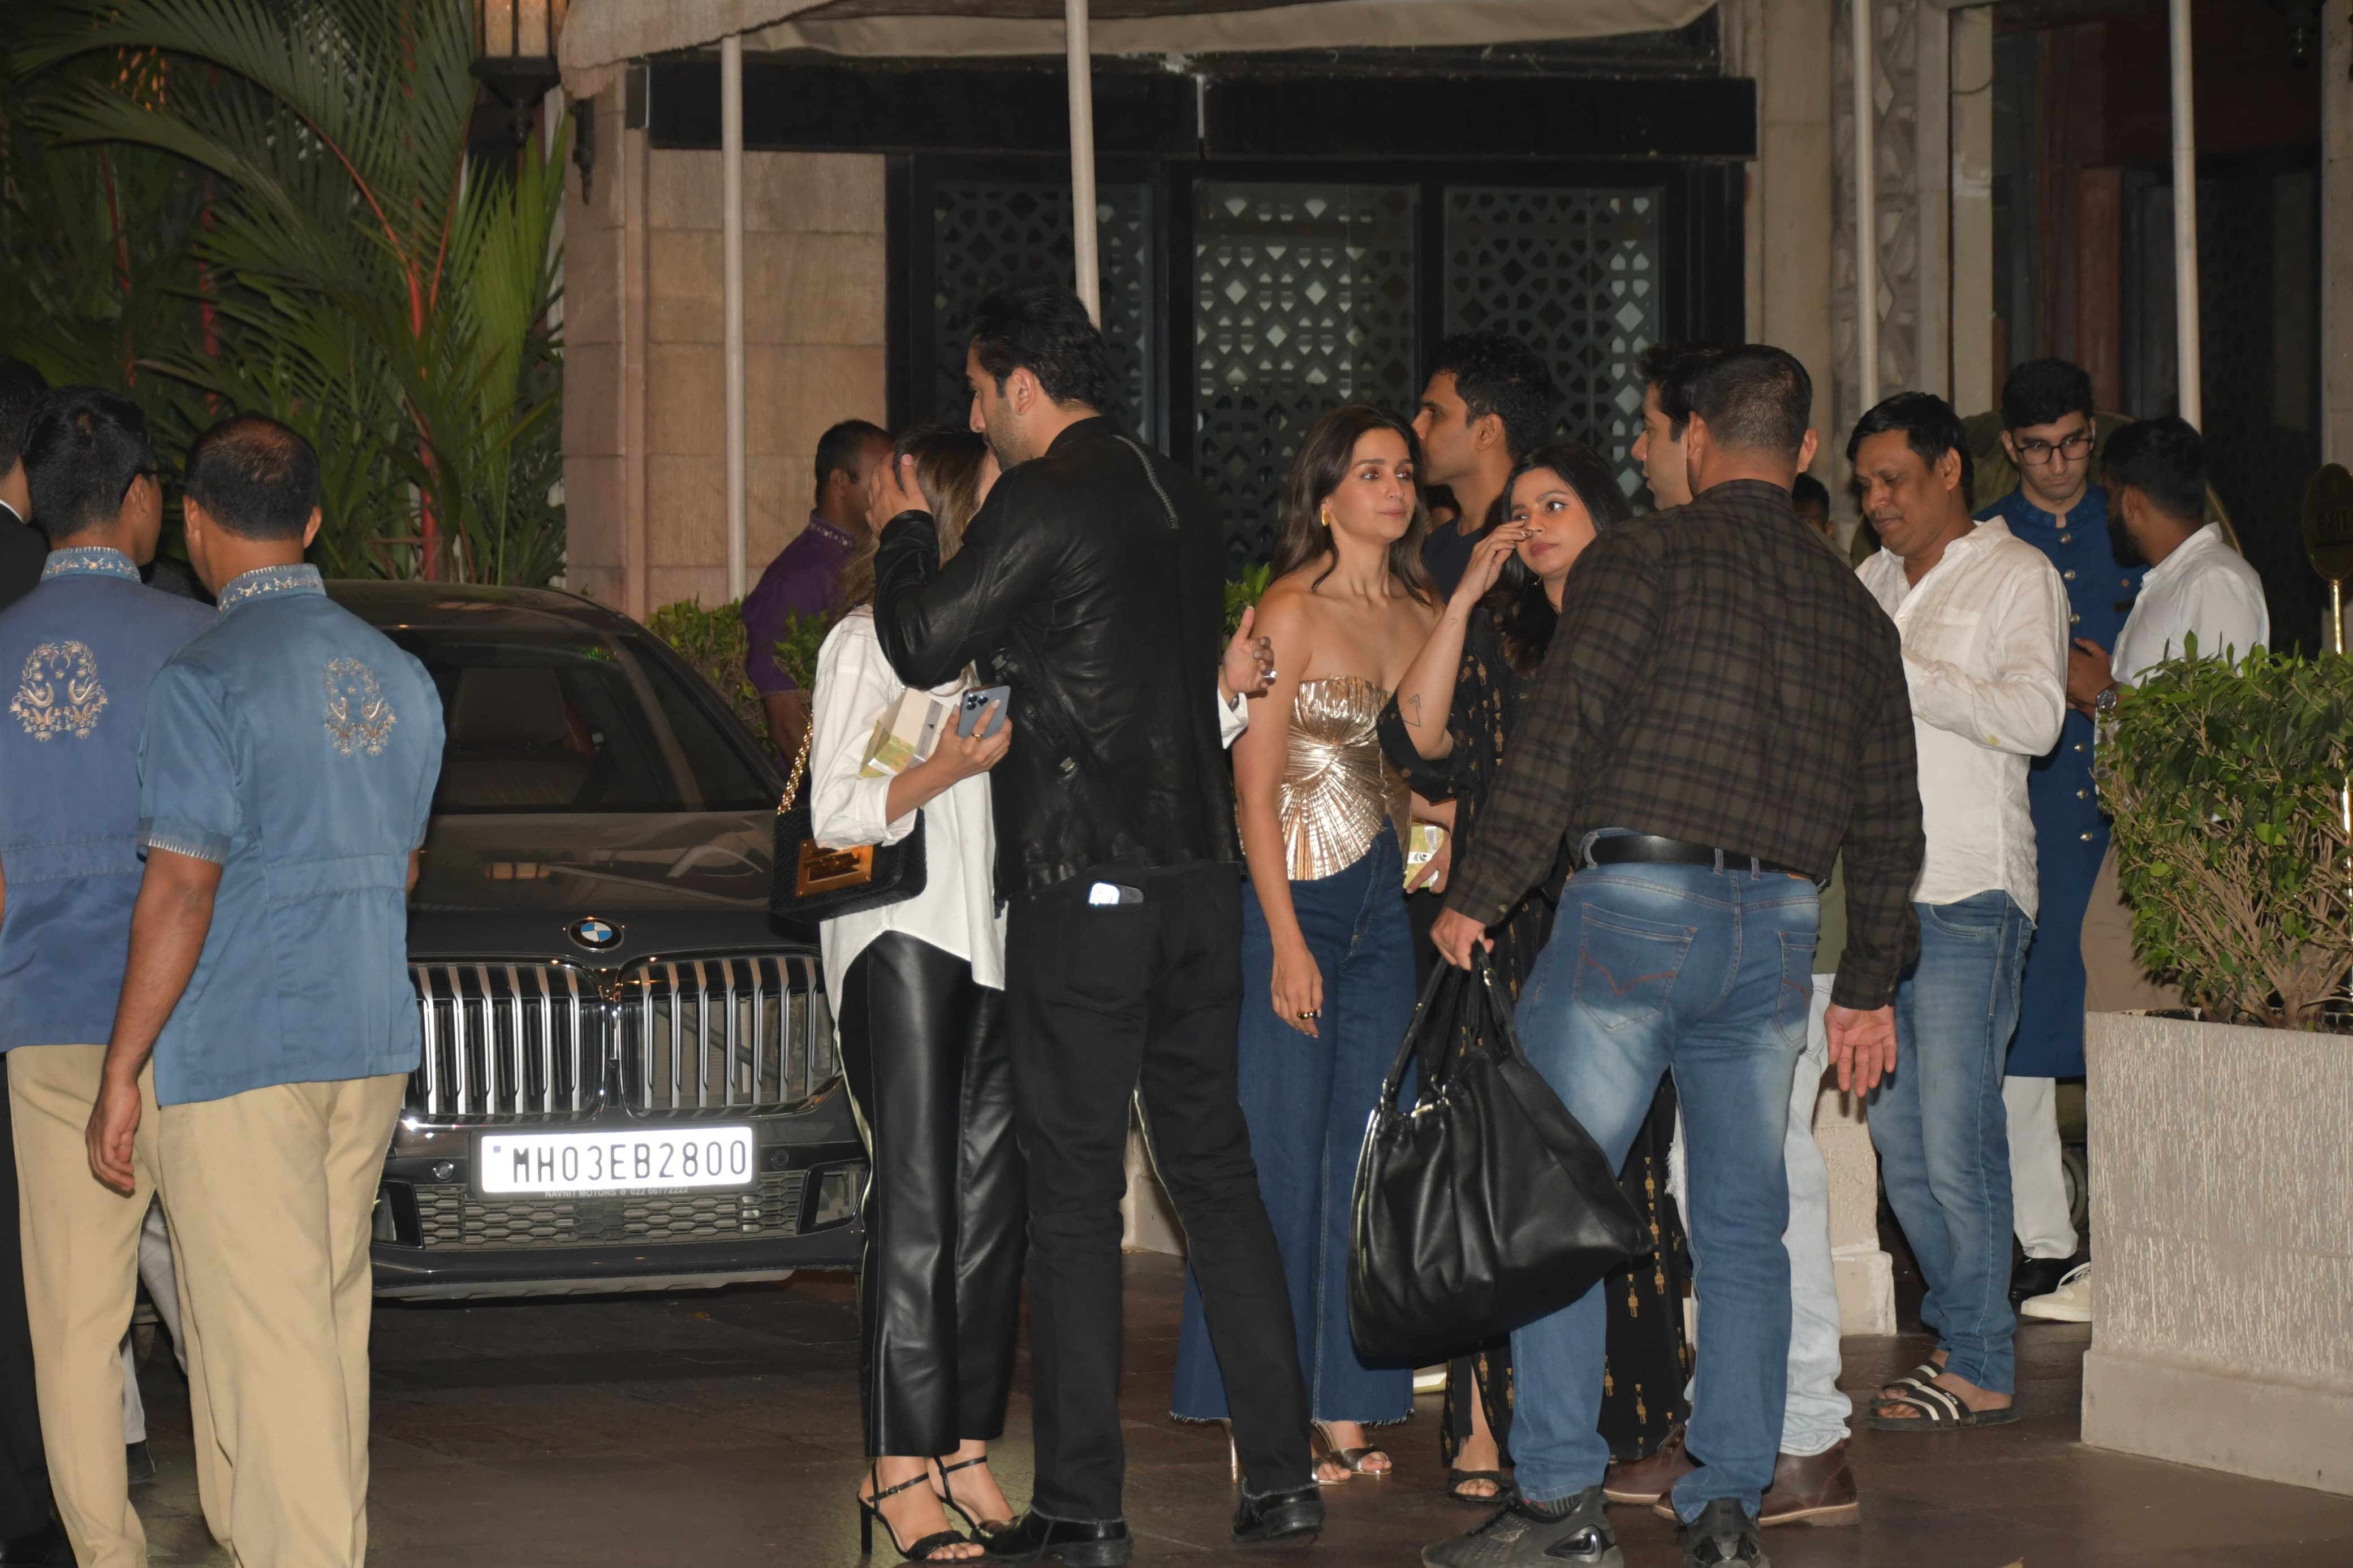 Pictures from the party went viral, showing Kapoor giving affectionate hugs and kisses to his sister-in-law Shaheen Bhatt. Kapoor hugged Shaheen tightly and planted a gentle kiss on her forehead before she left for her car.